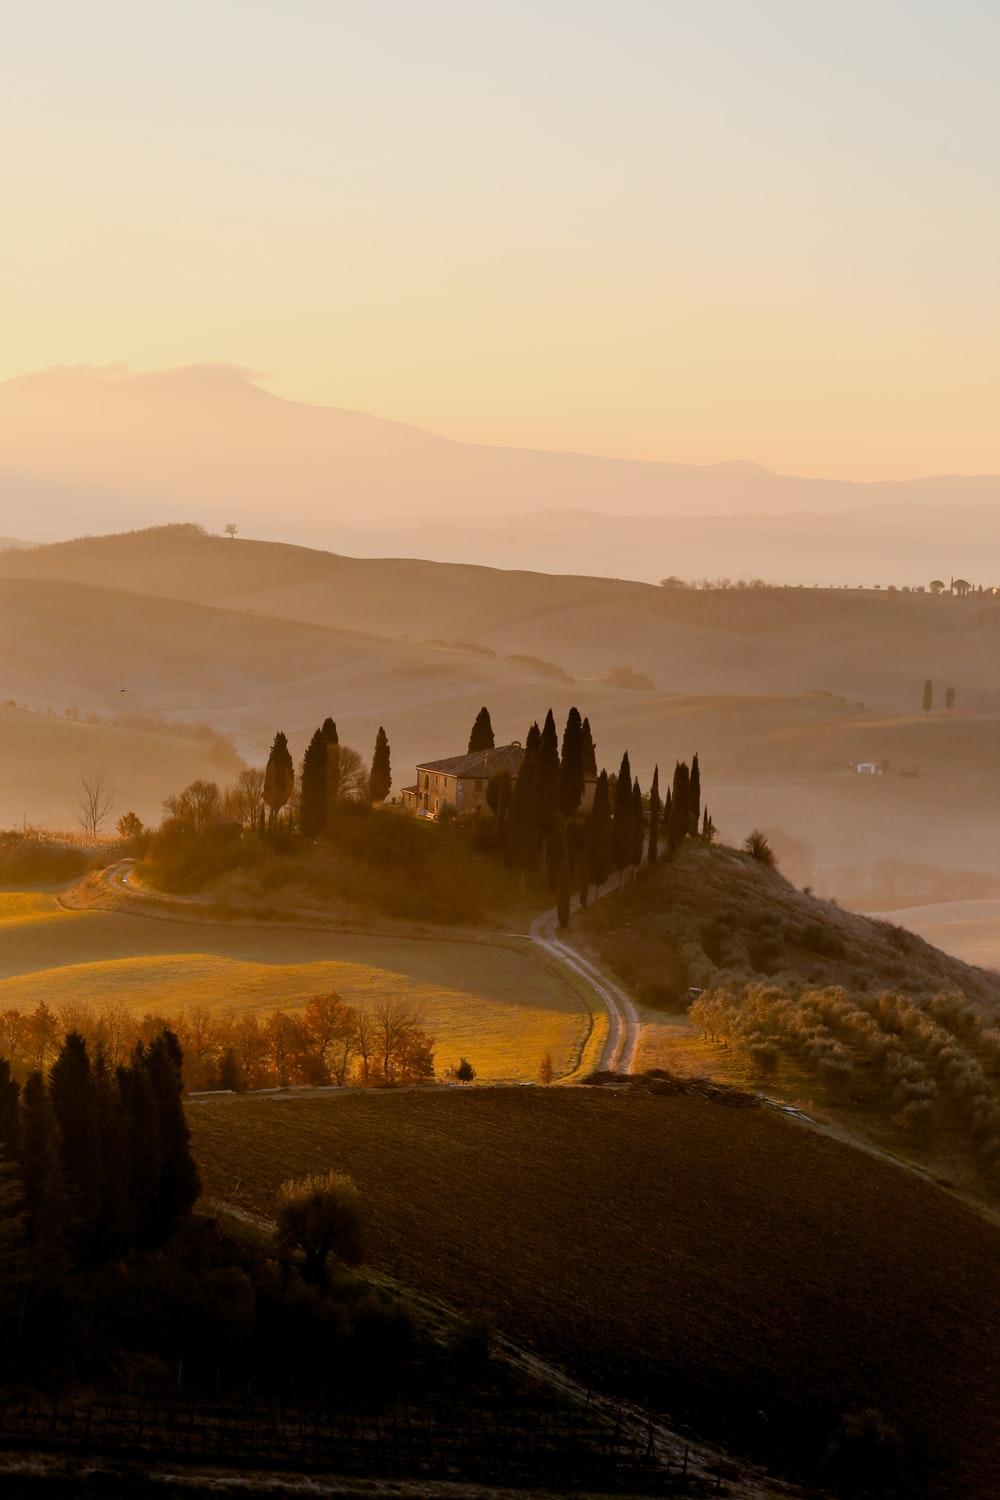 Tuscany Picture [Stunning!]. Download Free Image